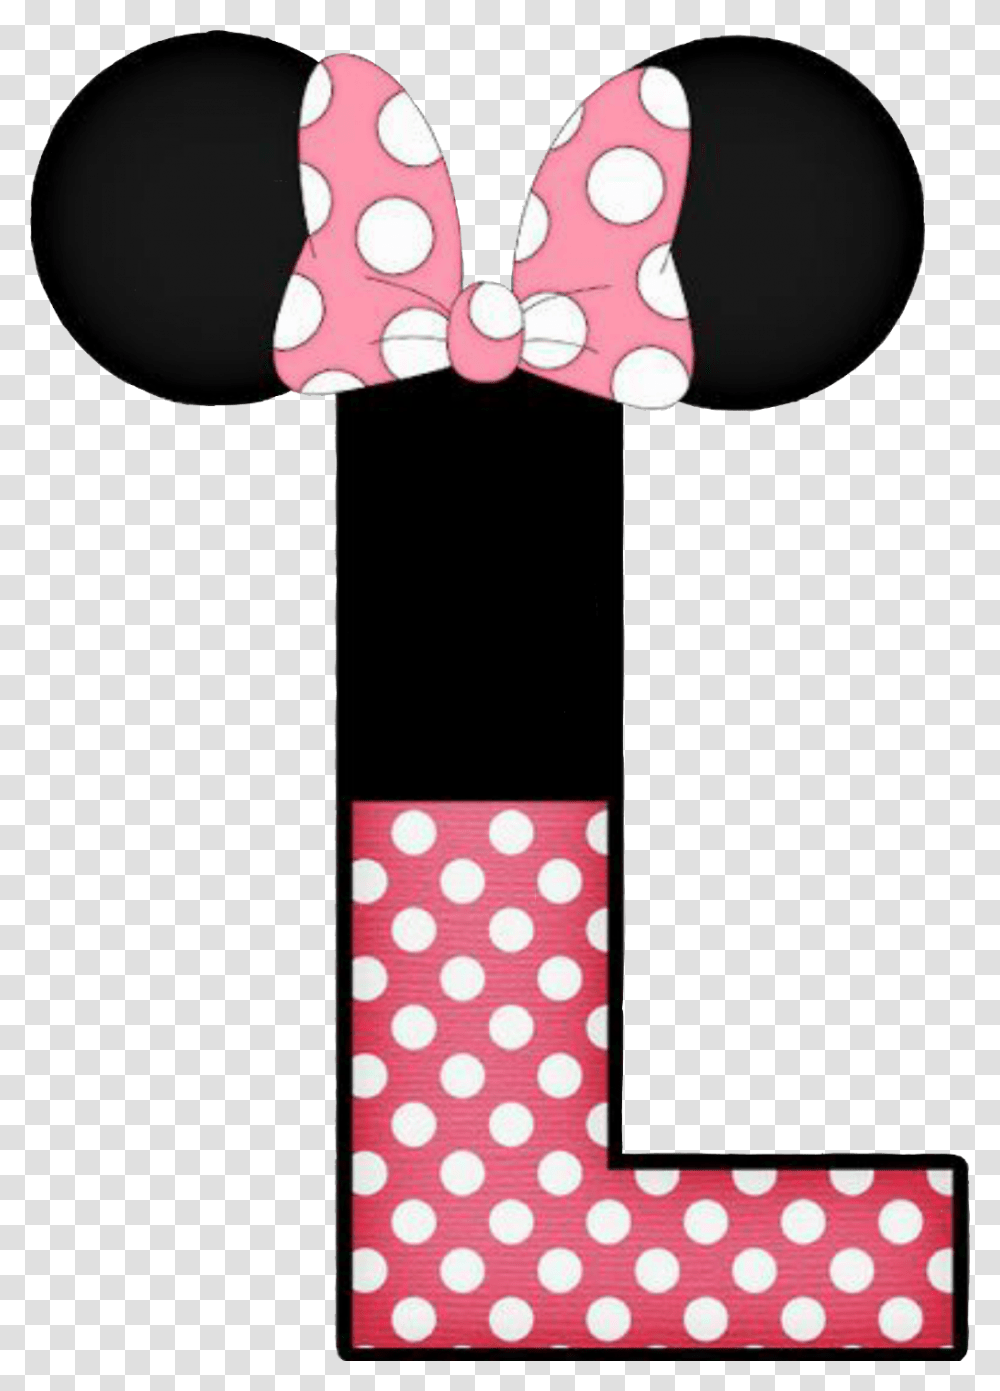 Minniemouse Letters E In Minnie Mouse Letters, Texture, Polka Dot Transparent Png